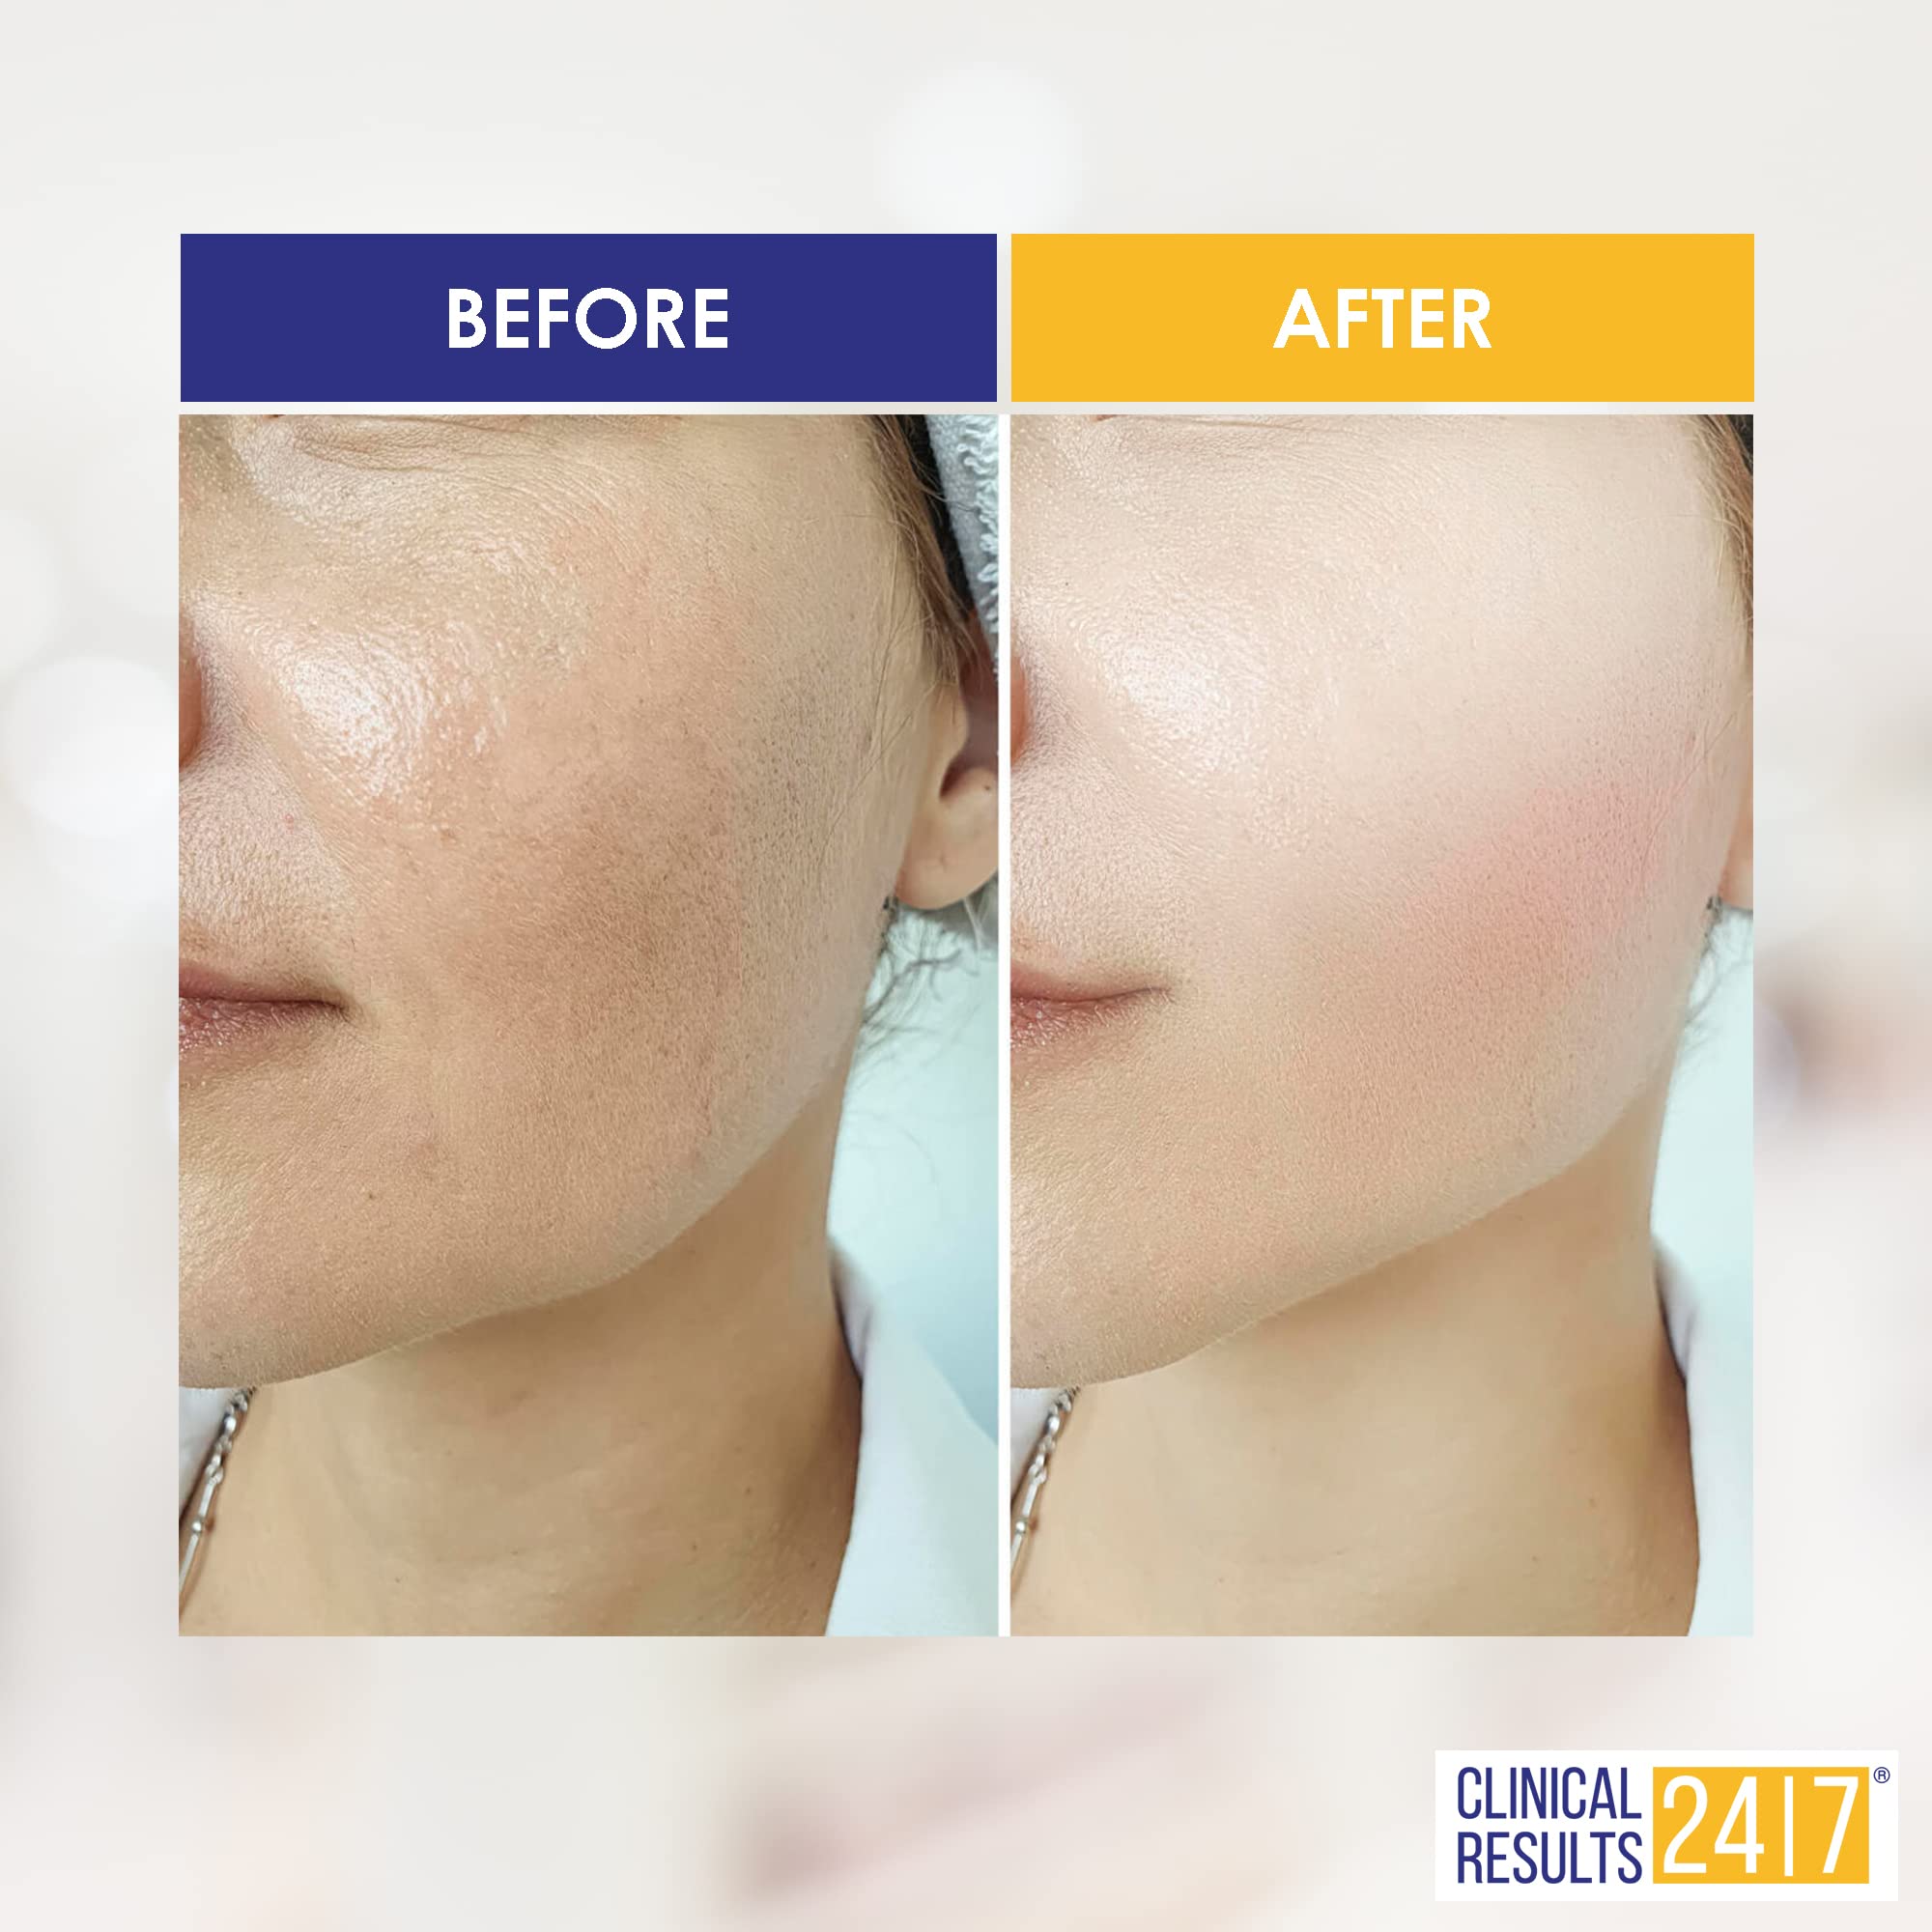 Increase Skin Hydration 161% and Firm Skin from the Lower Layers with 3D Lift PGA Serum | NASA Stem Cell & Growth Factor Technology Visibly Reduces Wrinkles |Clinical Results 24|7-8 Week Supply (1oz)